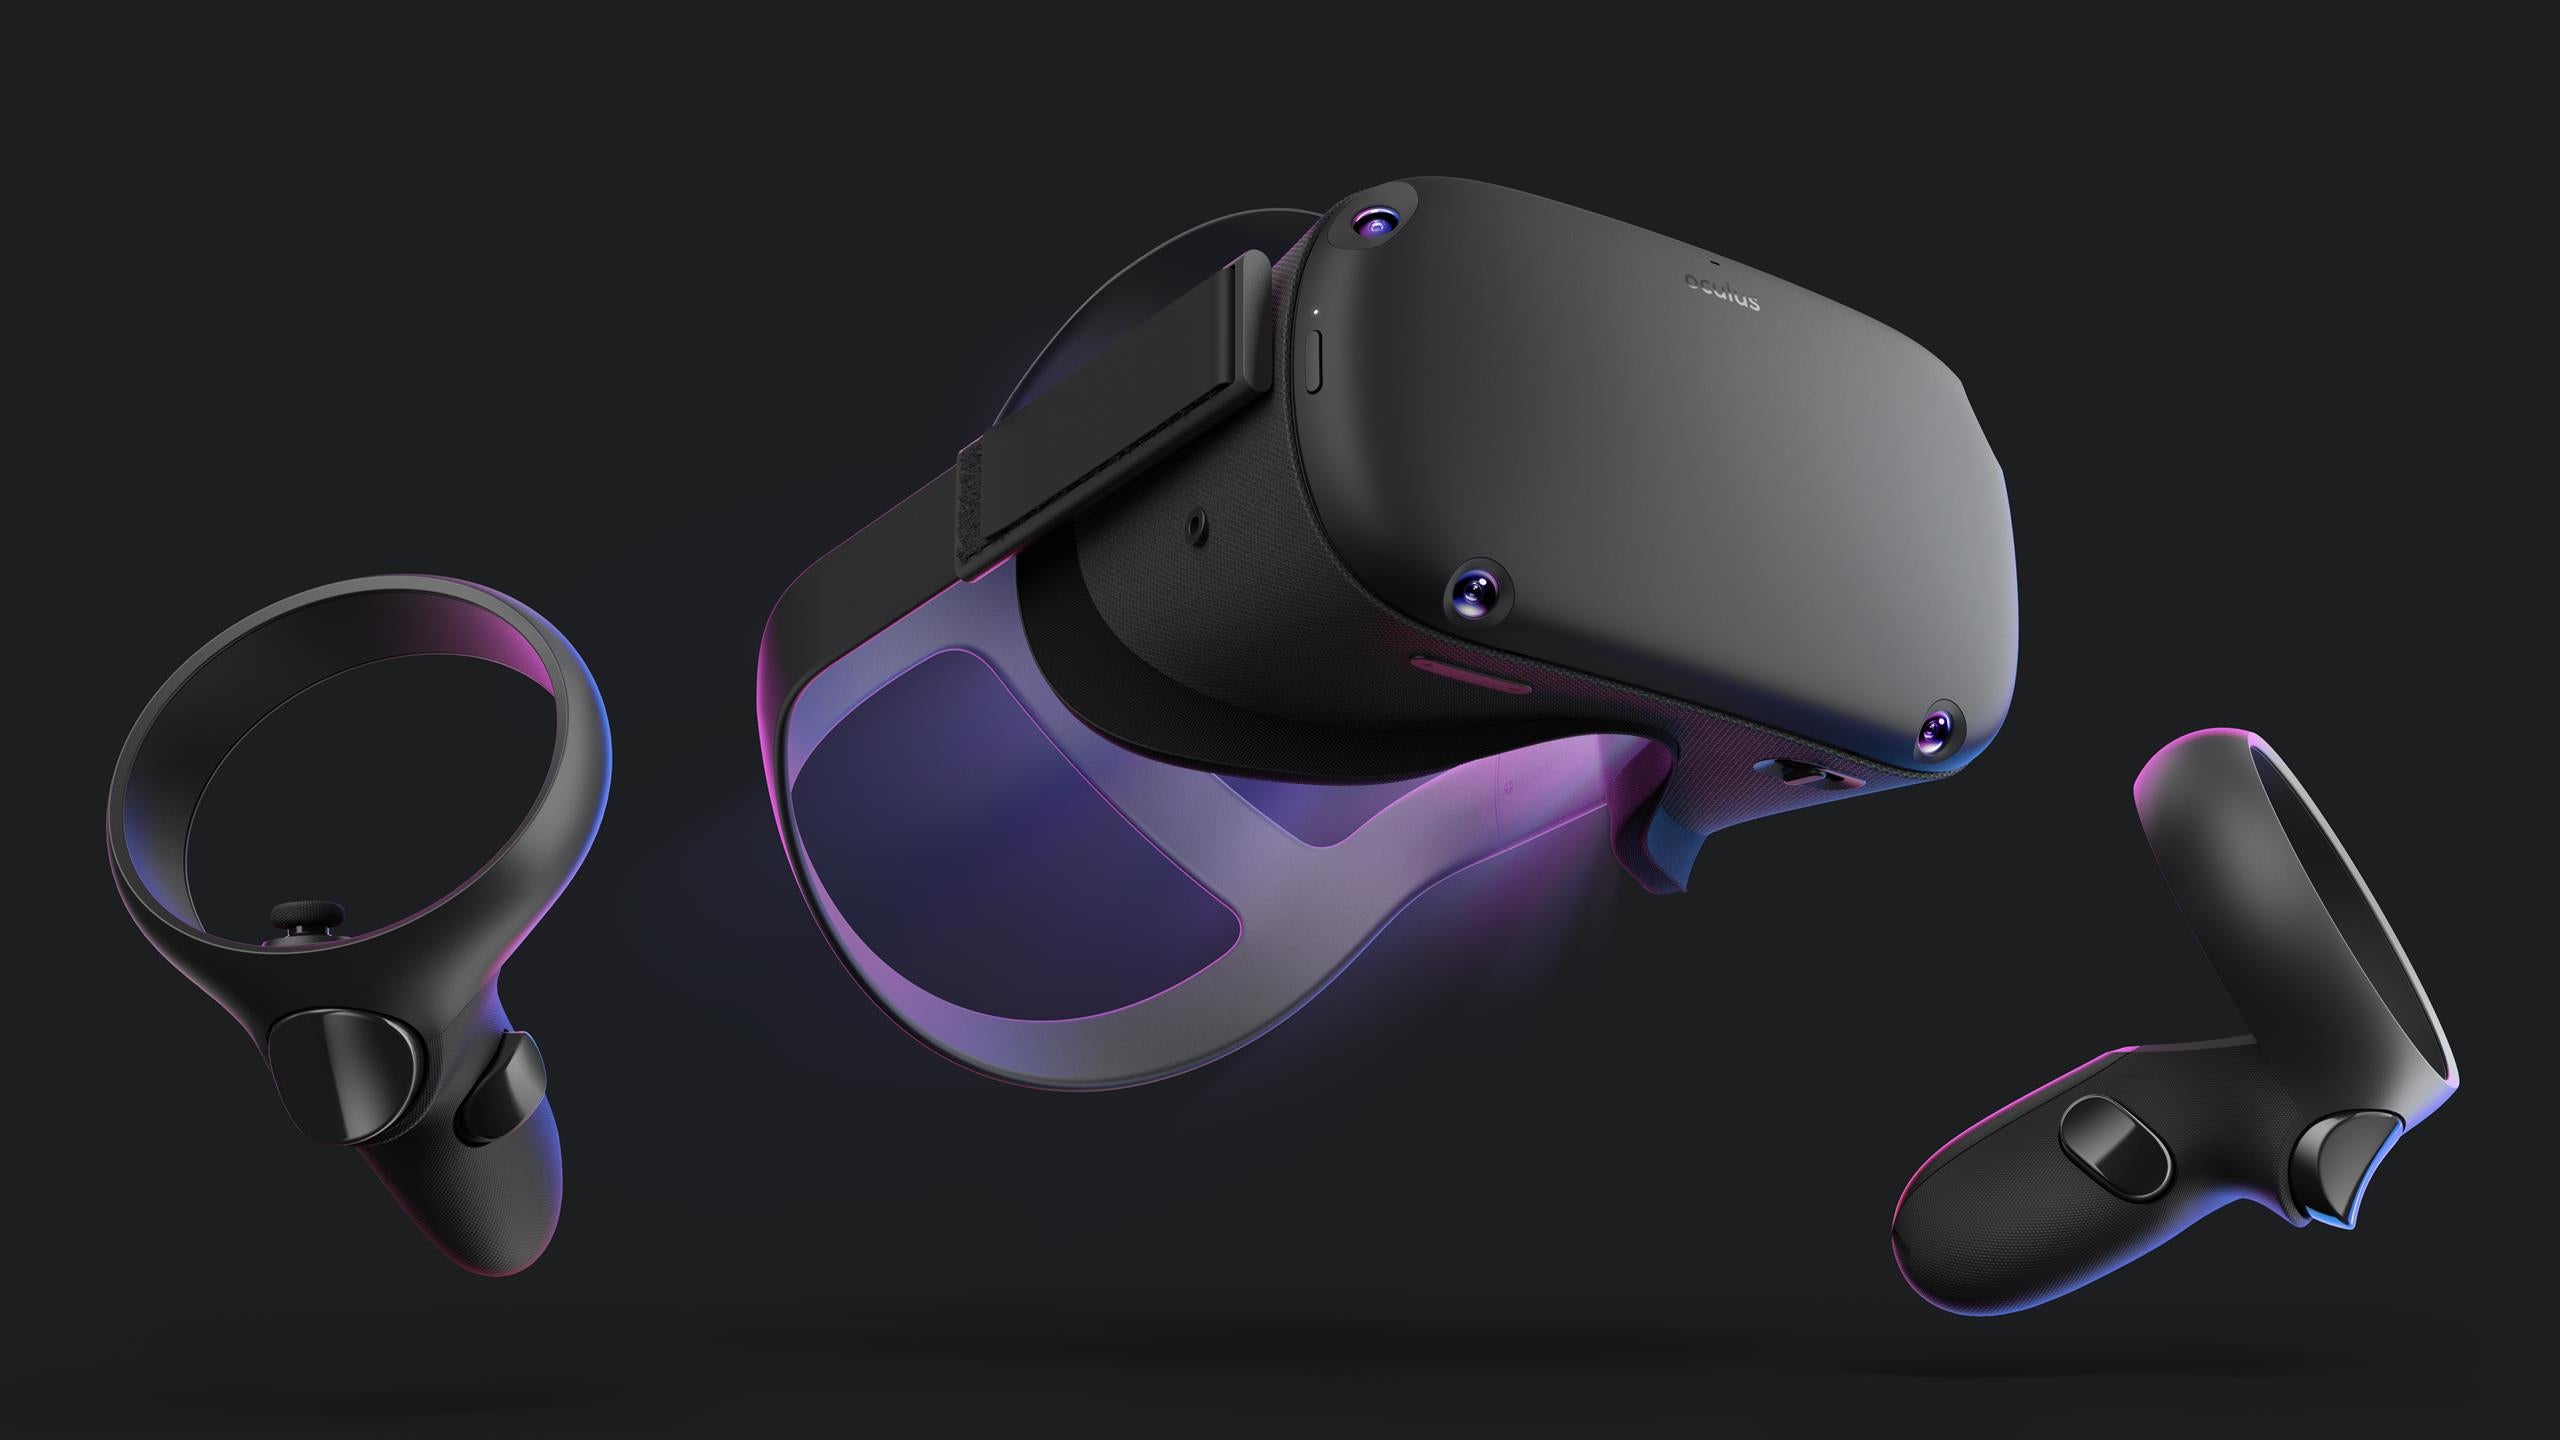 Image for You'll soon be able to use your Oculus Quest VR headset on PC